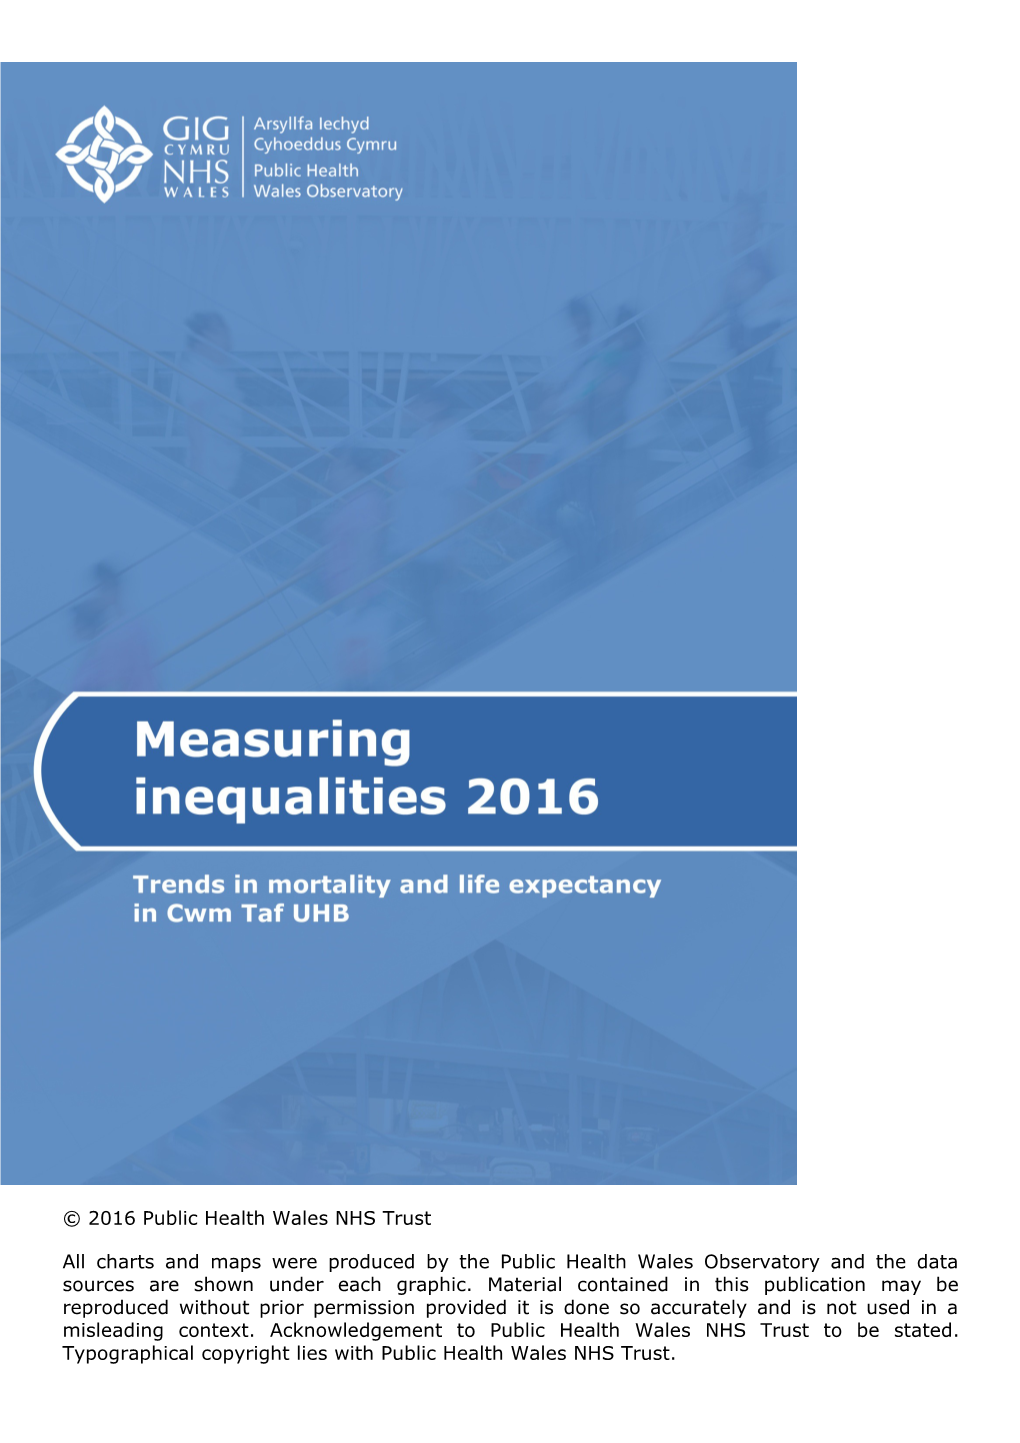 Measuring Inequalities 2016: Trends in Mortality and Life Expectancy in Cwm Taf UHB